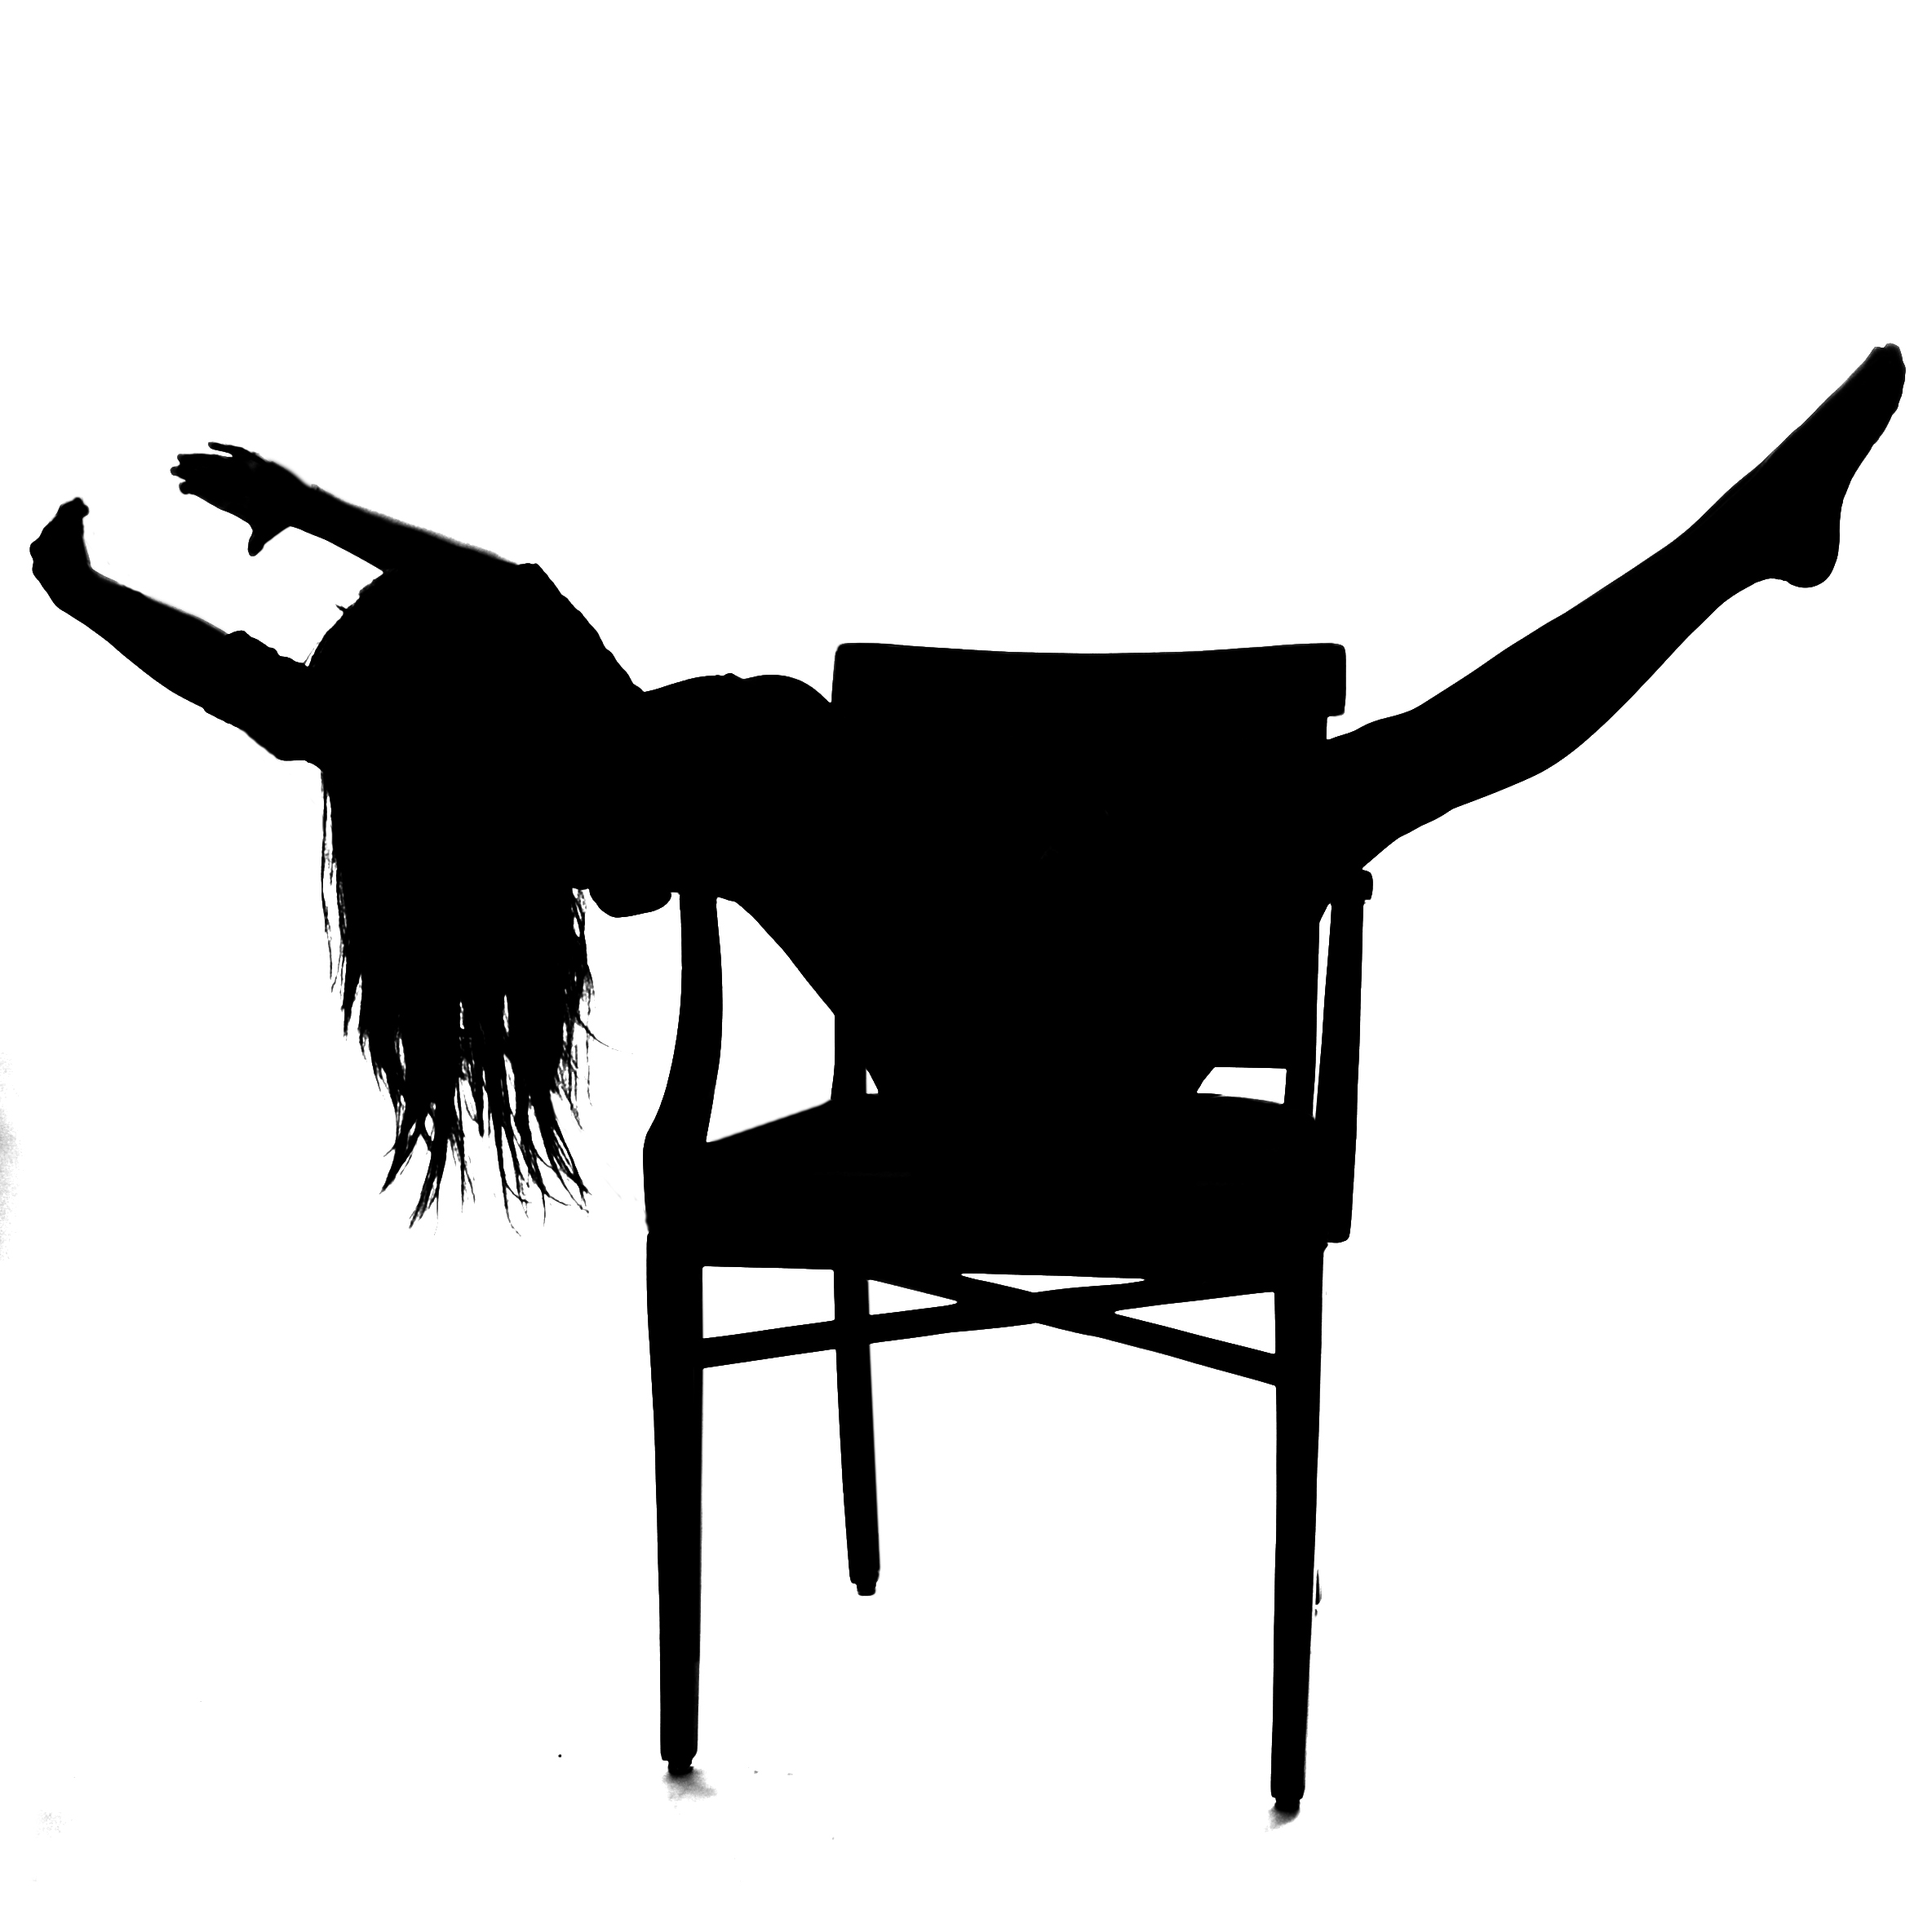 Dance silhouette 9 | Flickr - Photo Sharing!